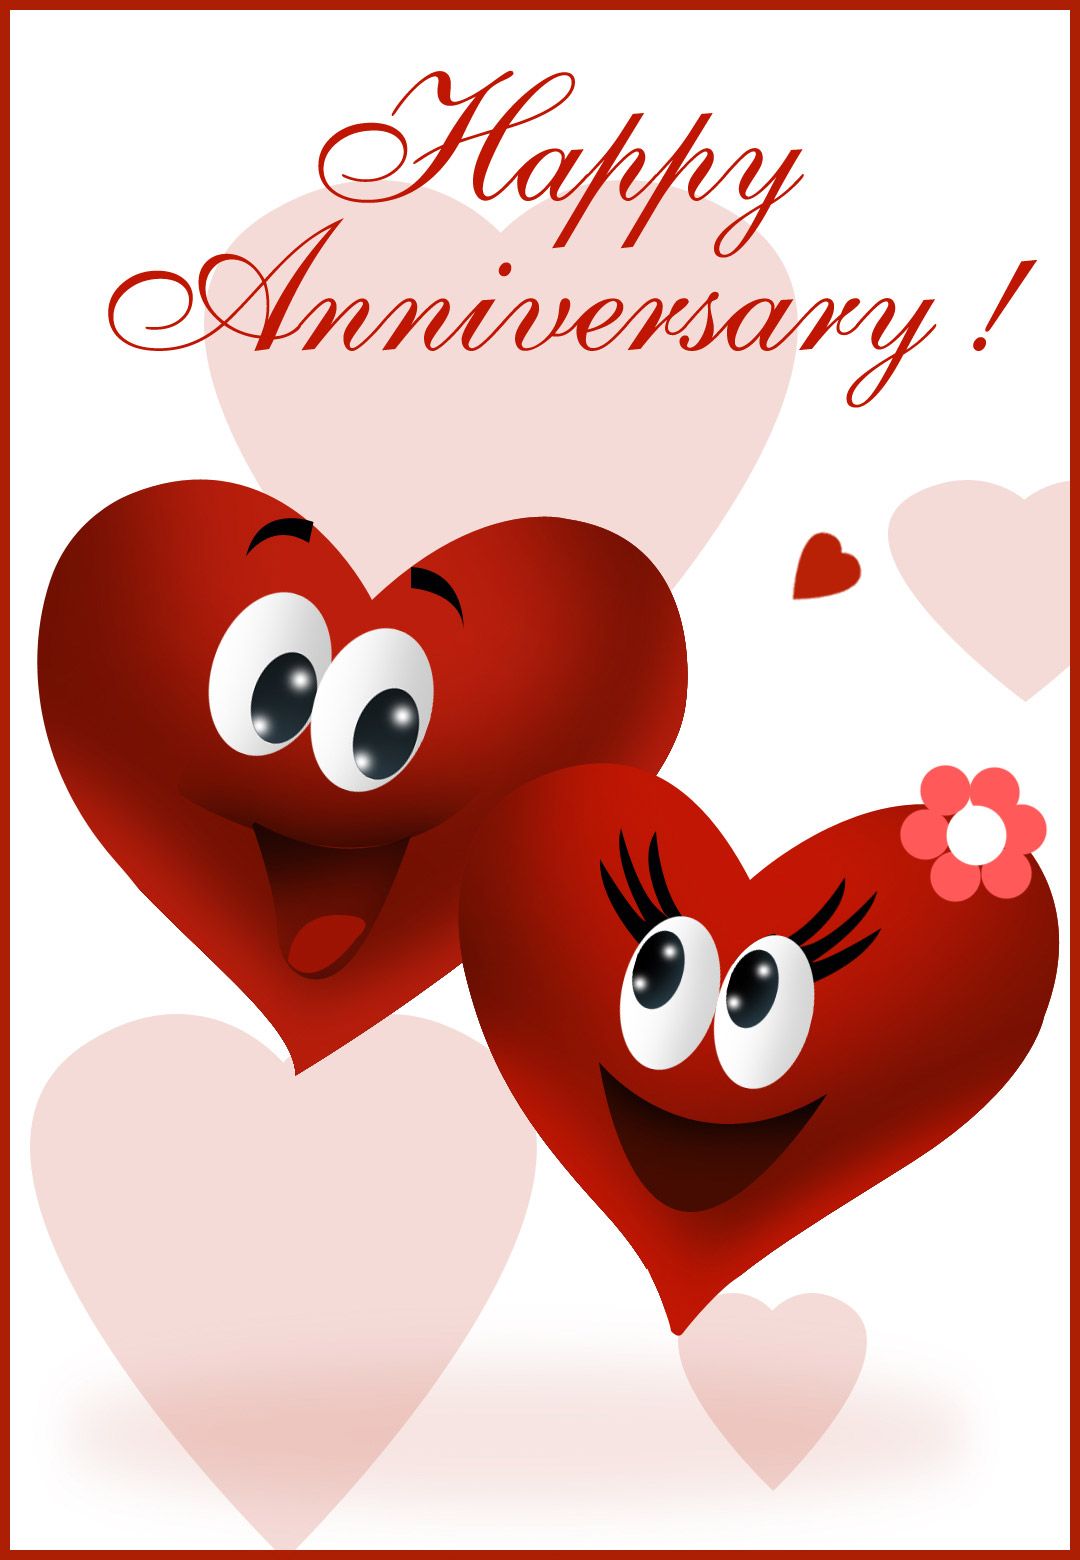 Download printable anniversary cards free